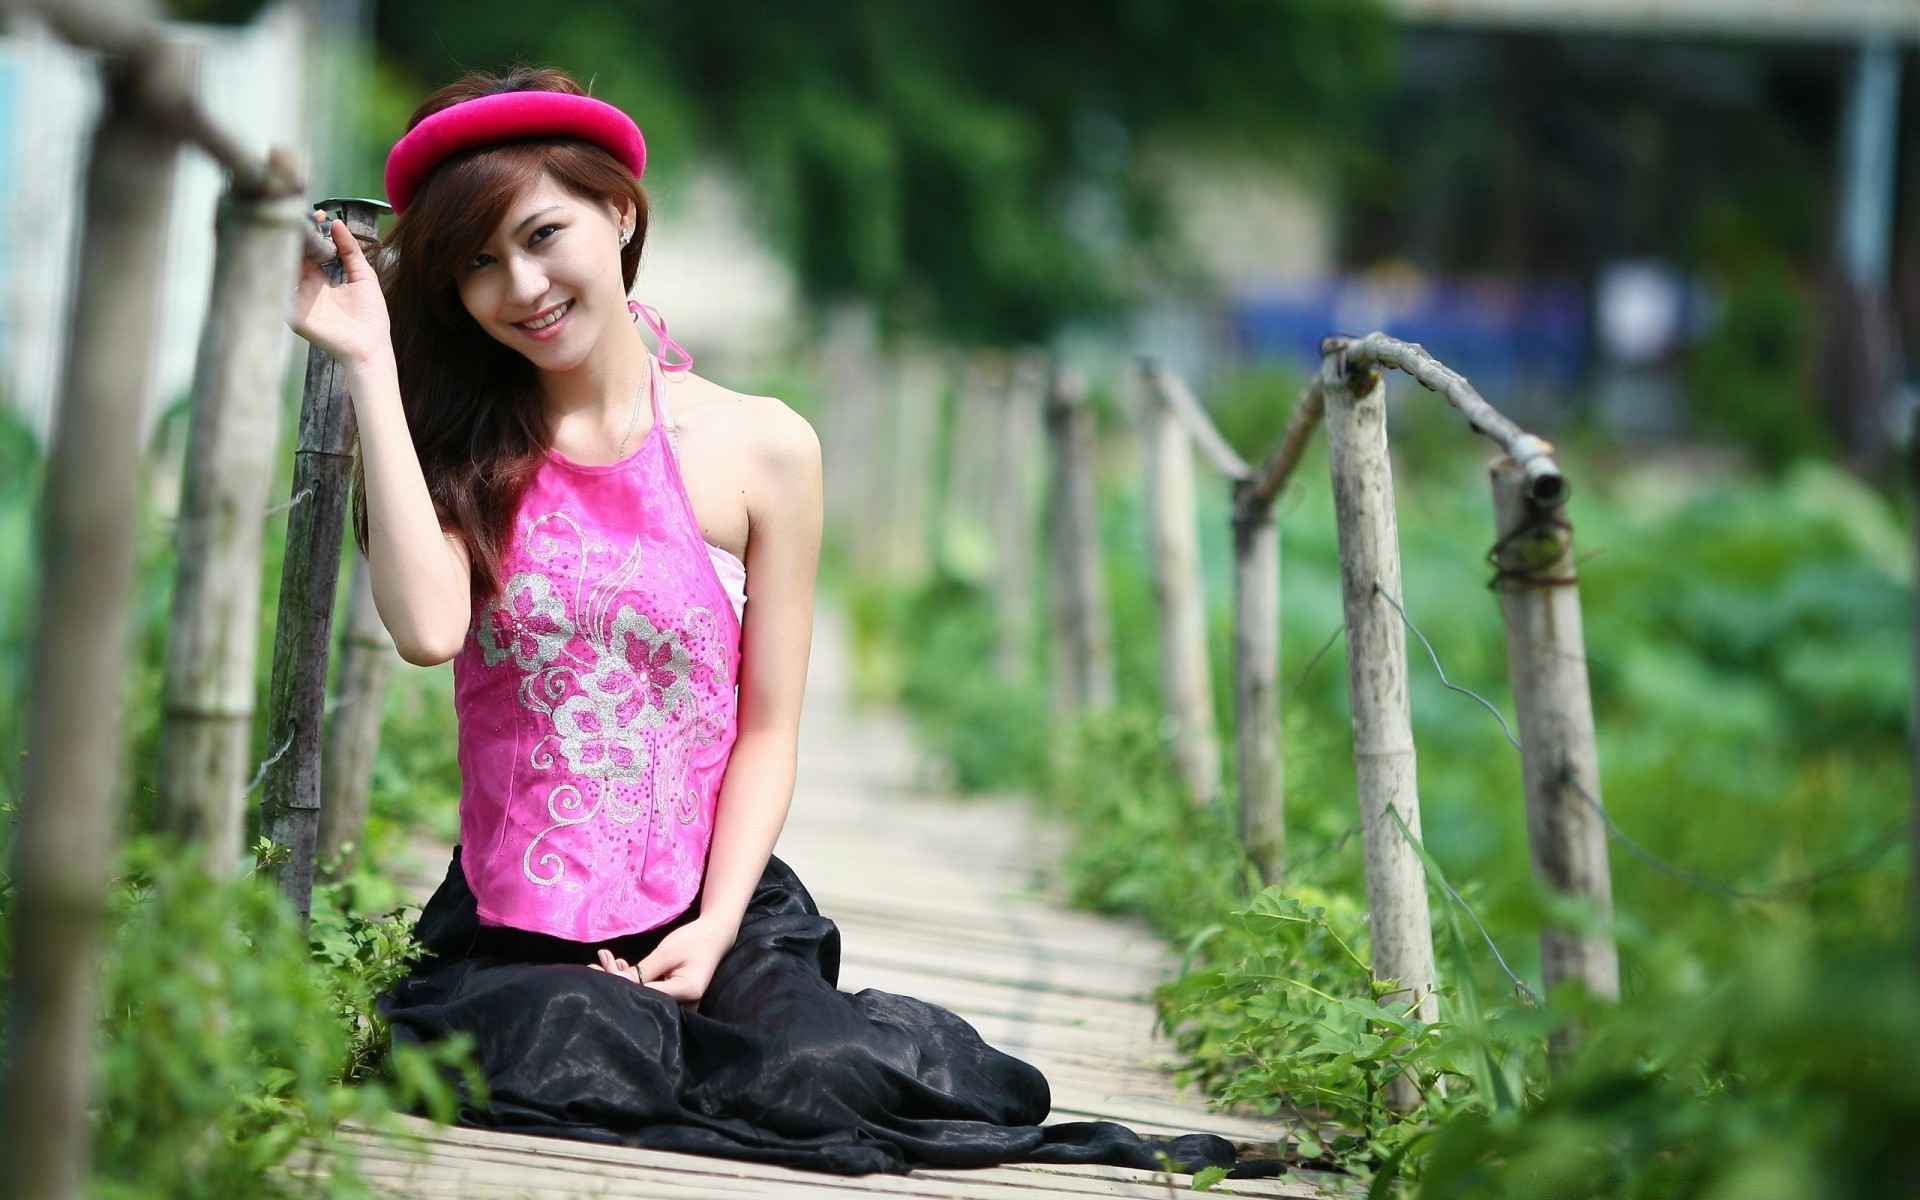 the other girls nature summer girl outdoors park woman leisure young portrait outside smile grass lifestyle beautiful one relaxation person